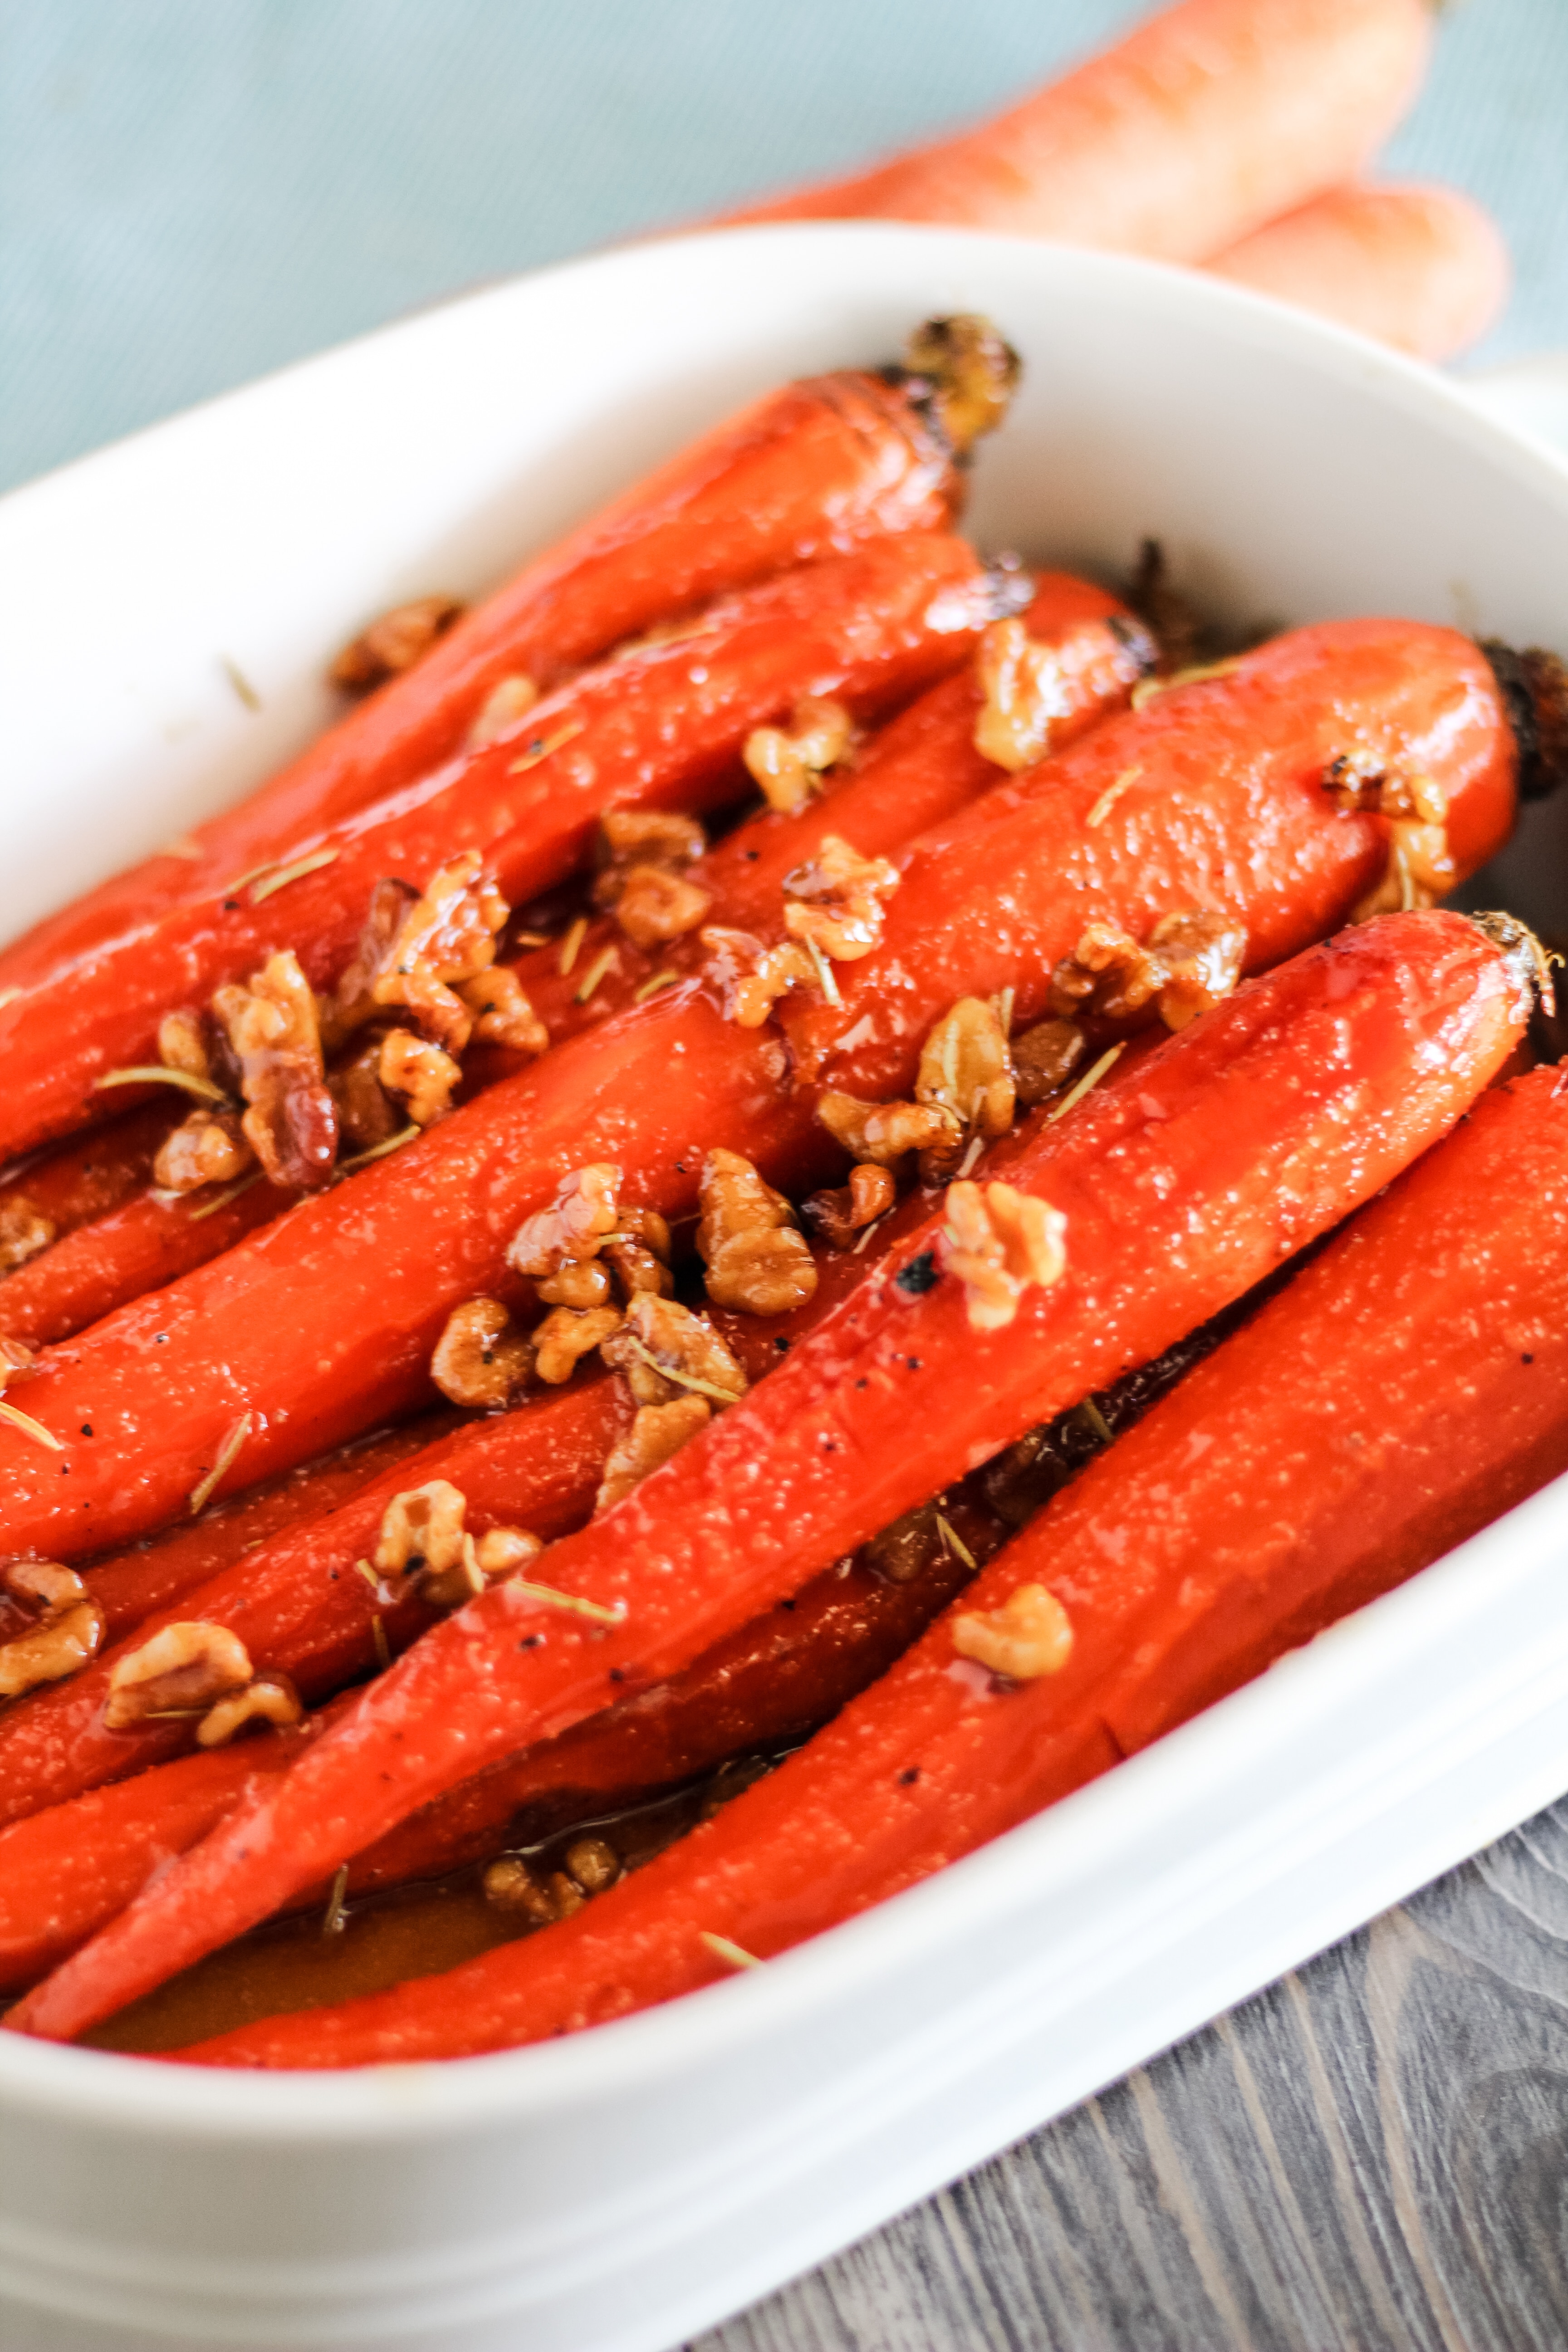 Honey and Maple Glazed Carrots in a garnished with walnuts and rosemary in white serving dish